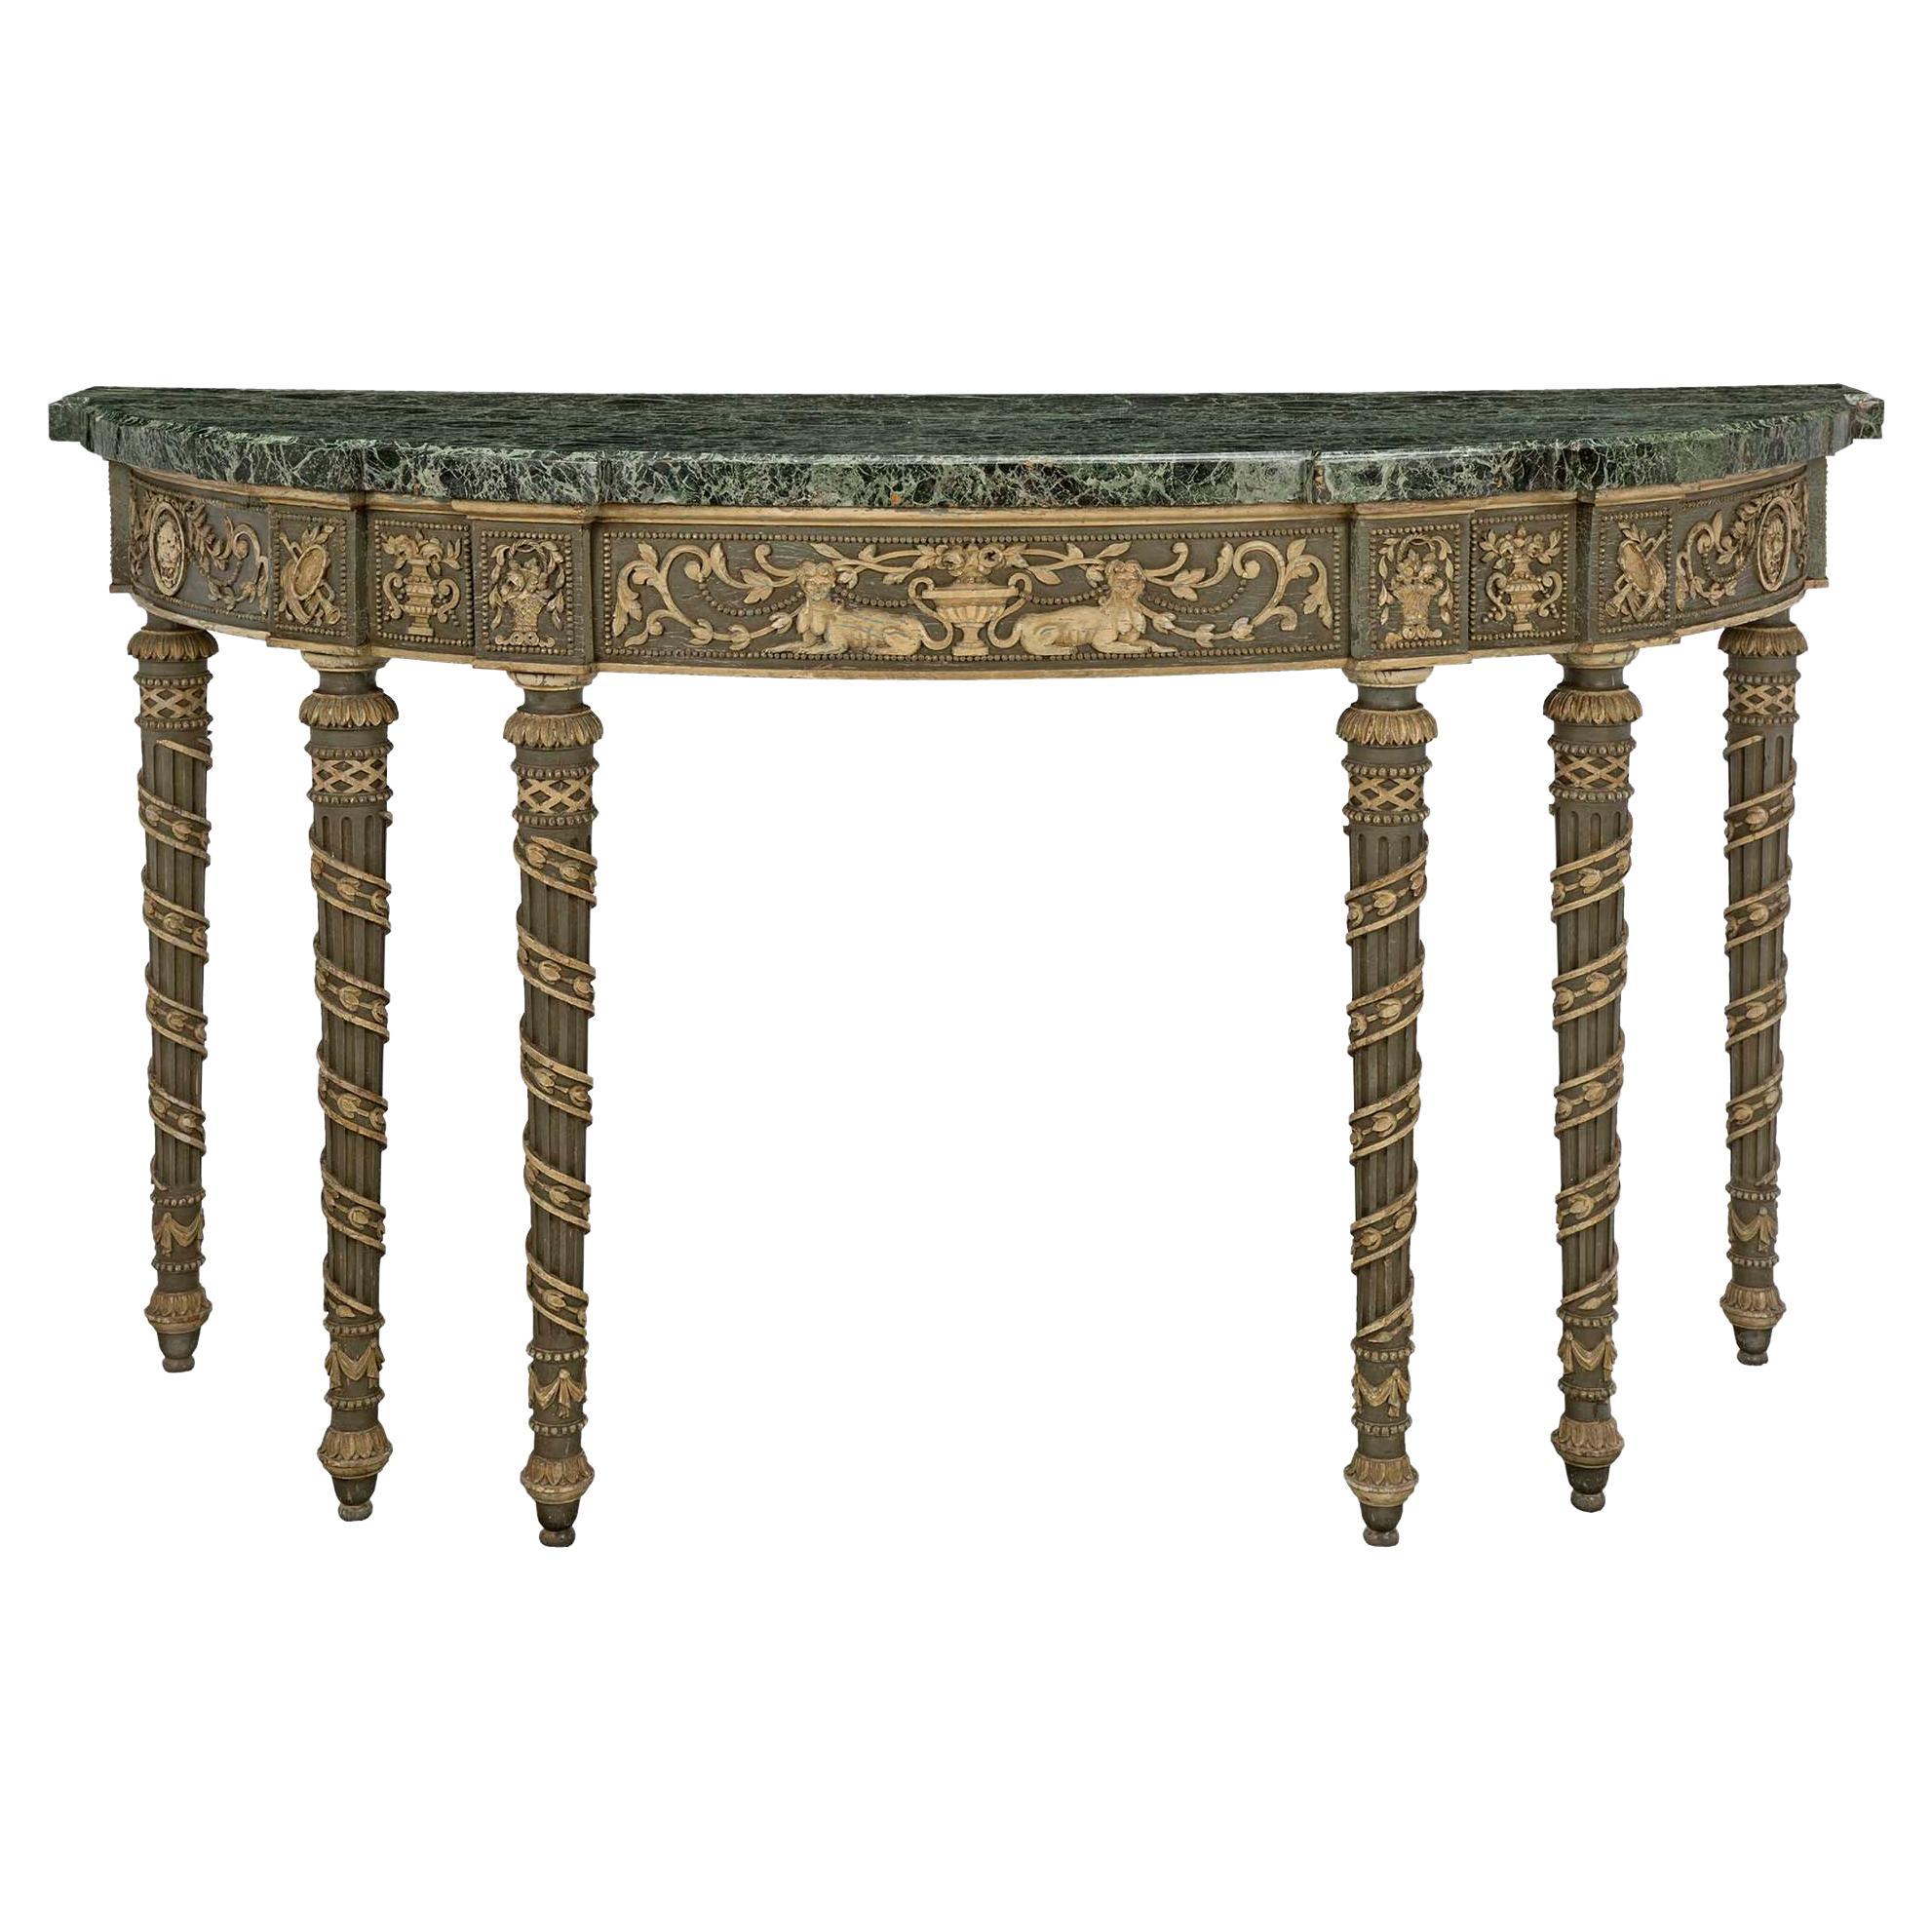 Italian 19th Century Louis XVI St. Patinated and Vert De Patricia Marble Console